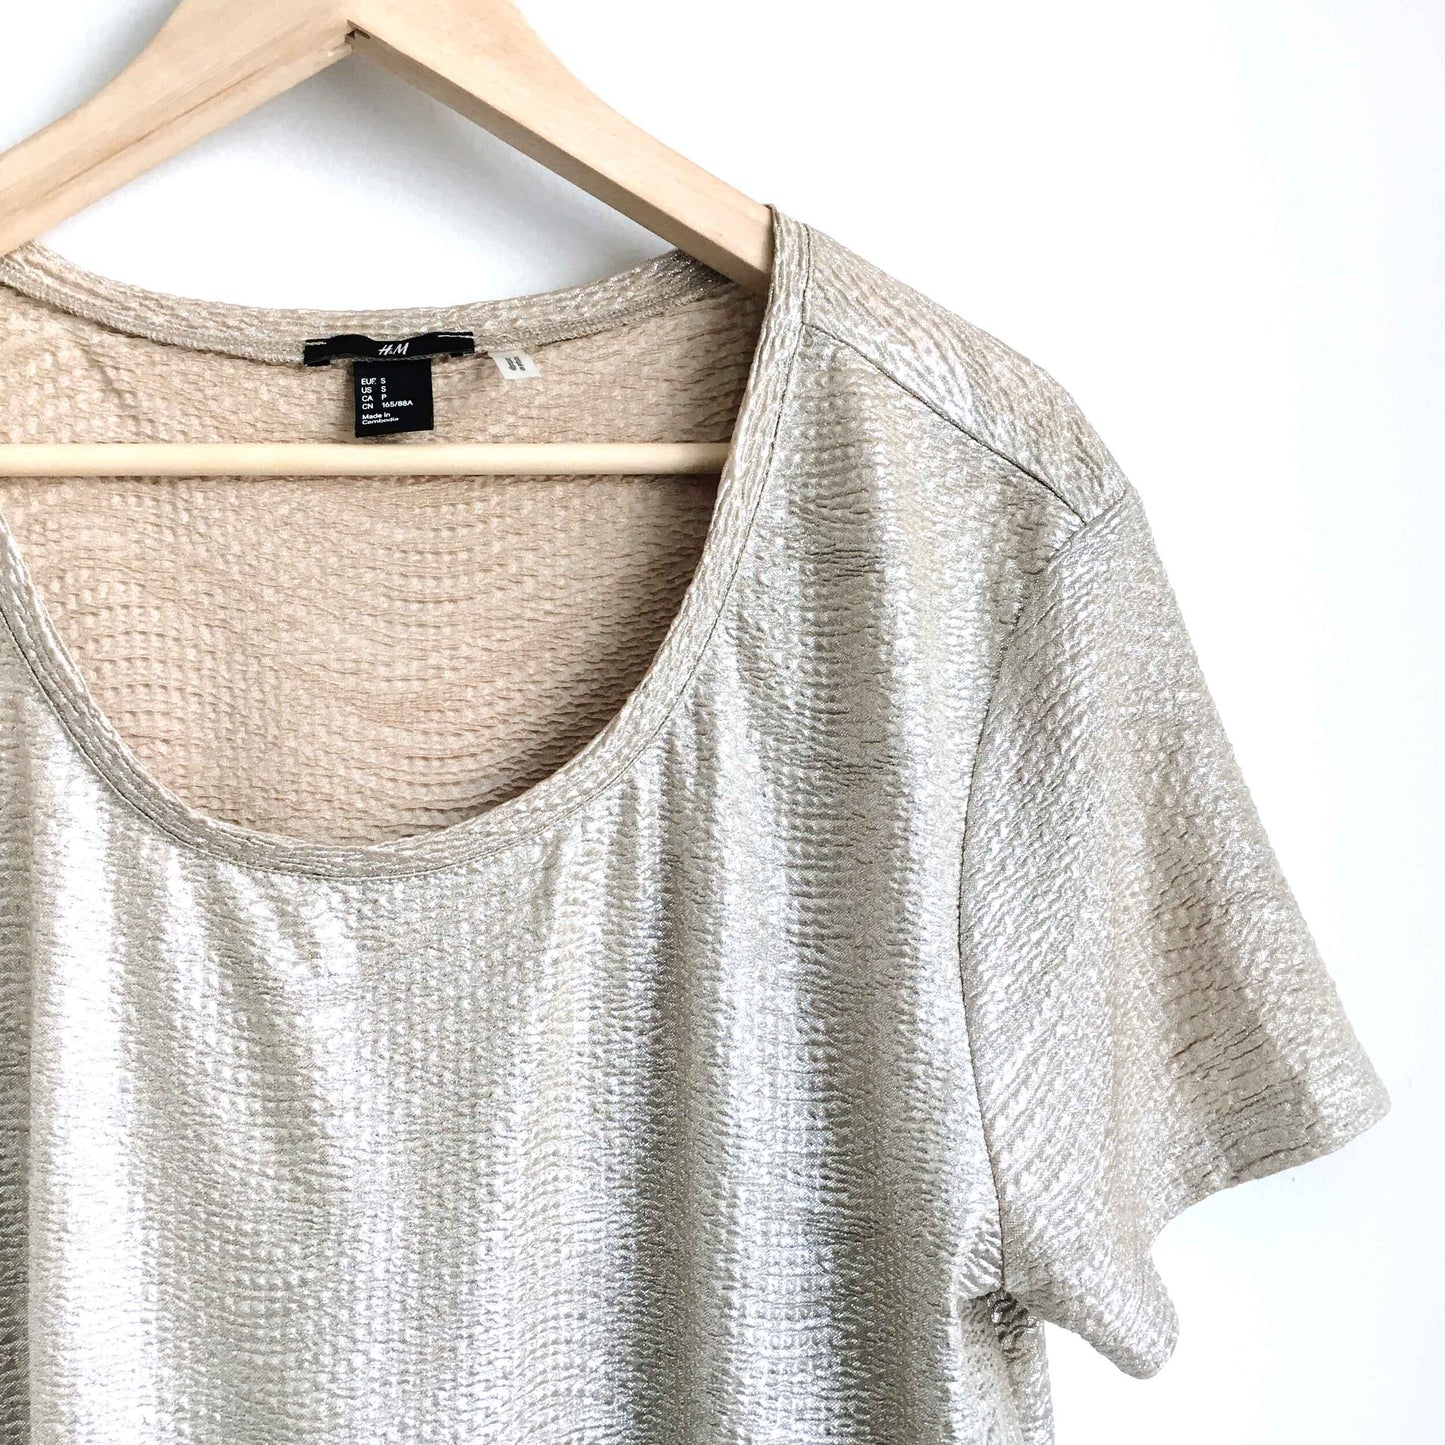 H&amp;M oversized gold crepe crinkle top - size Small